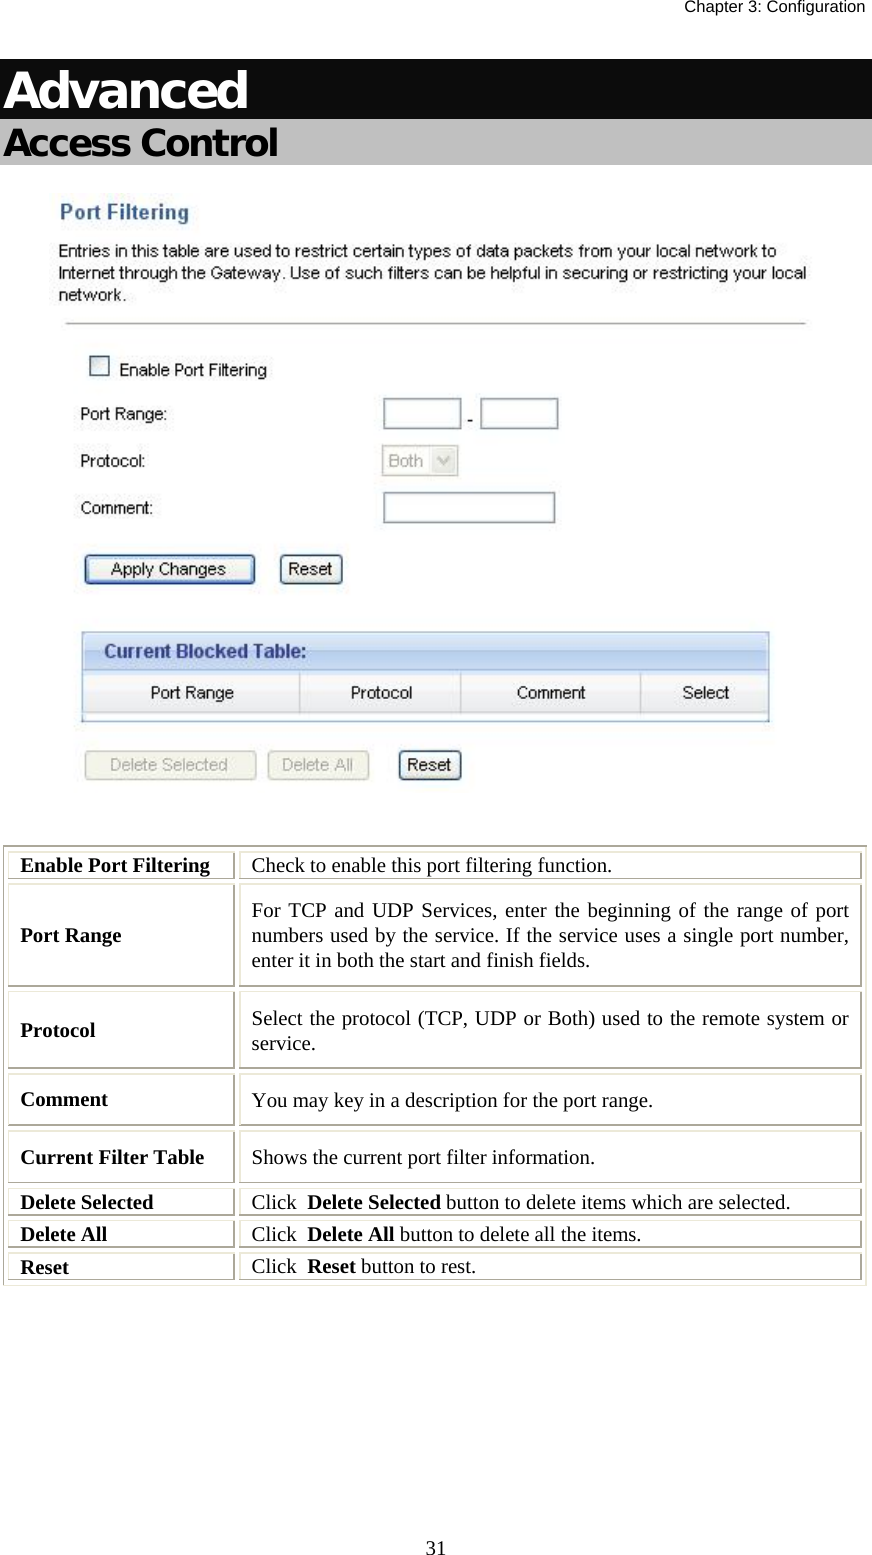   Chapter 3: Configuration  31Advanced Access Control   Enable Port Filtering  Check to enable this port filtering function. Port Range  For TCP and UDP Services, enter the beginning of the range of port numbers used by the service. If the service uses a single port number, enter it in both the start and finish fields. Protocol  Select the protocol (TCP, UDP or Both) used to the remote system or service. Comment  You may key in a description for the port range. Current Filter Table  Shows the current port filter information. Delete Selected  Click  Delete Selected button to delete items which are selected. Delete All  Click  Delete All button to delete all the items. Reset  Click  Reset button to rest.   